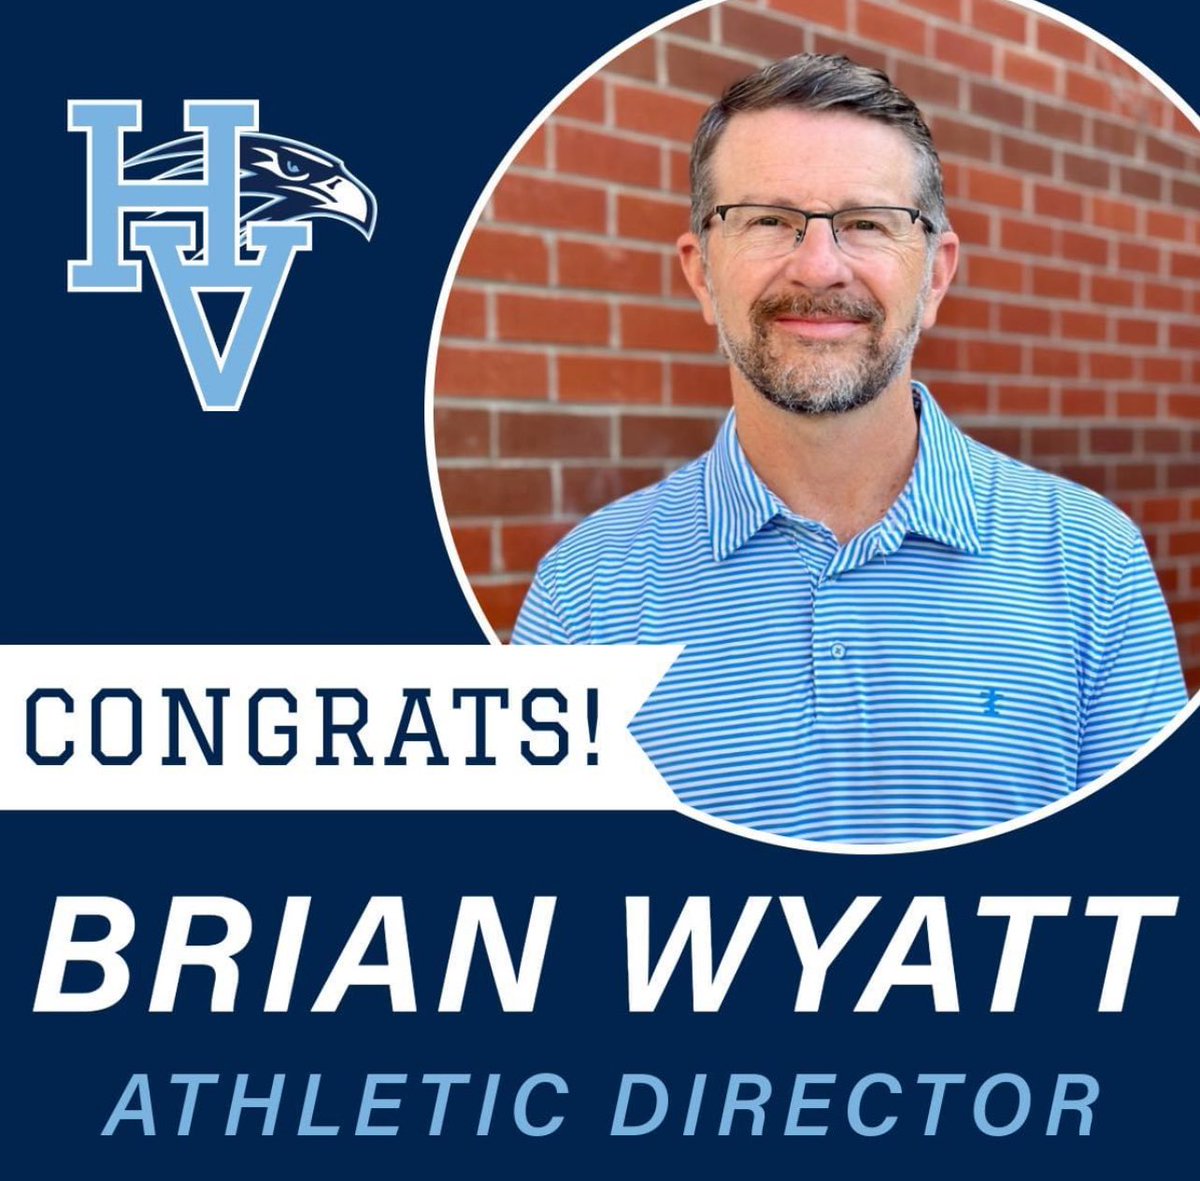 We are excited to remove the interim title from Brian Wyatt and officially announce him as our permanent athletic director. Mr. Wyatt stepped up to fill this role as an interim this semester. Excited for what Coach Wyatt brings to athletics in the valley! Go Hawks!